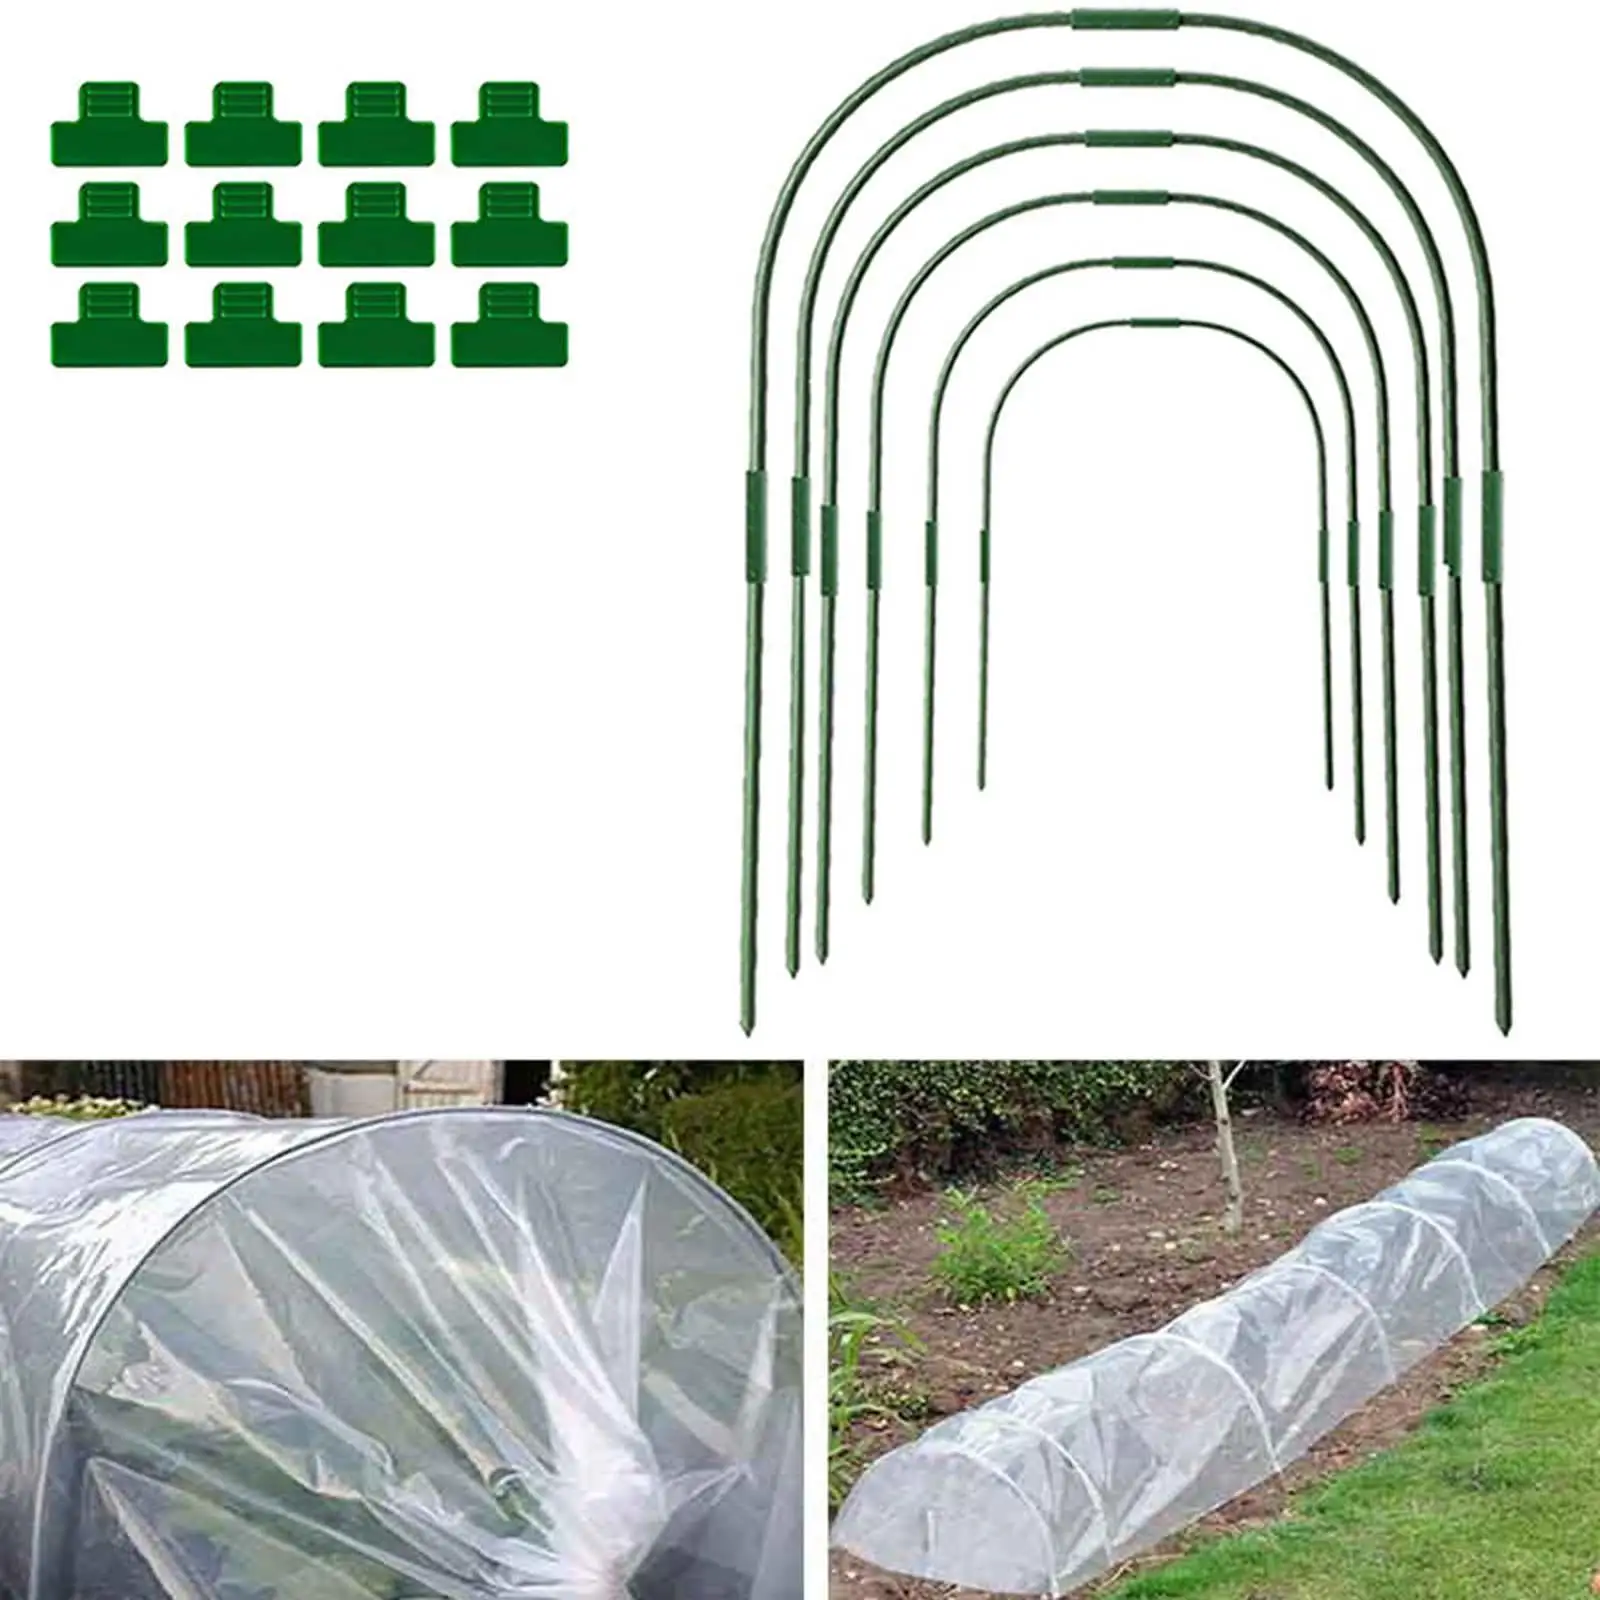 Planter Support Stakes Greenhouse Clamp Netting Tunnel Hoop Clip Frame Planter Support Grow Tunnel Greenhouse Hoop Kits Frame